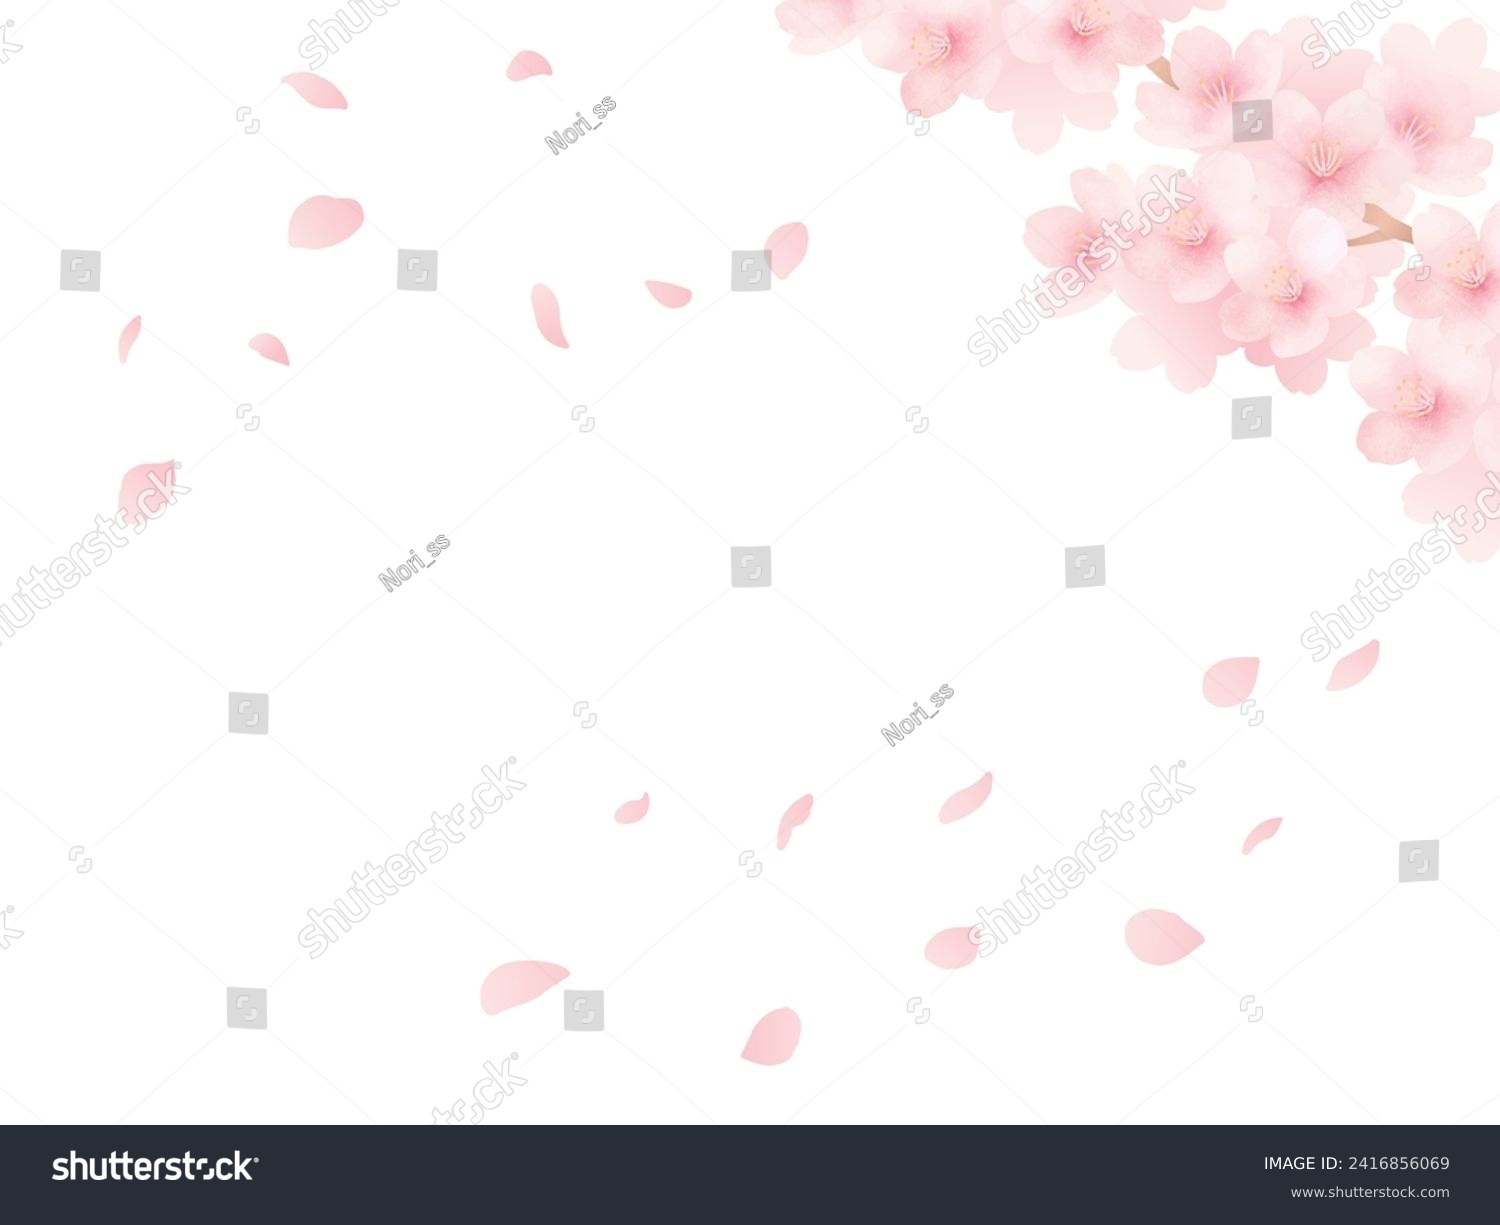 Background of cherry blossoms in full bloom and petals. Watercolor illustration. #2416856069